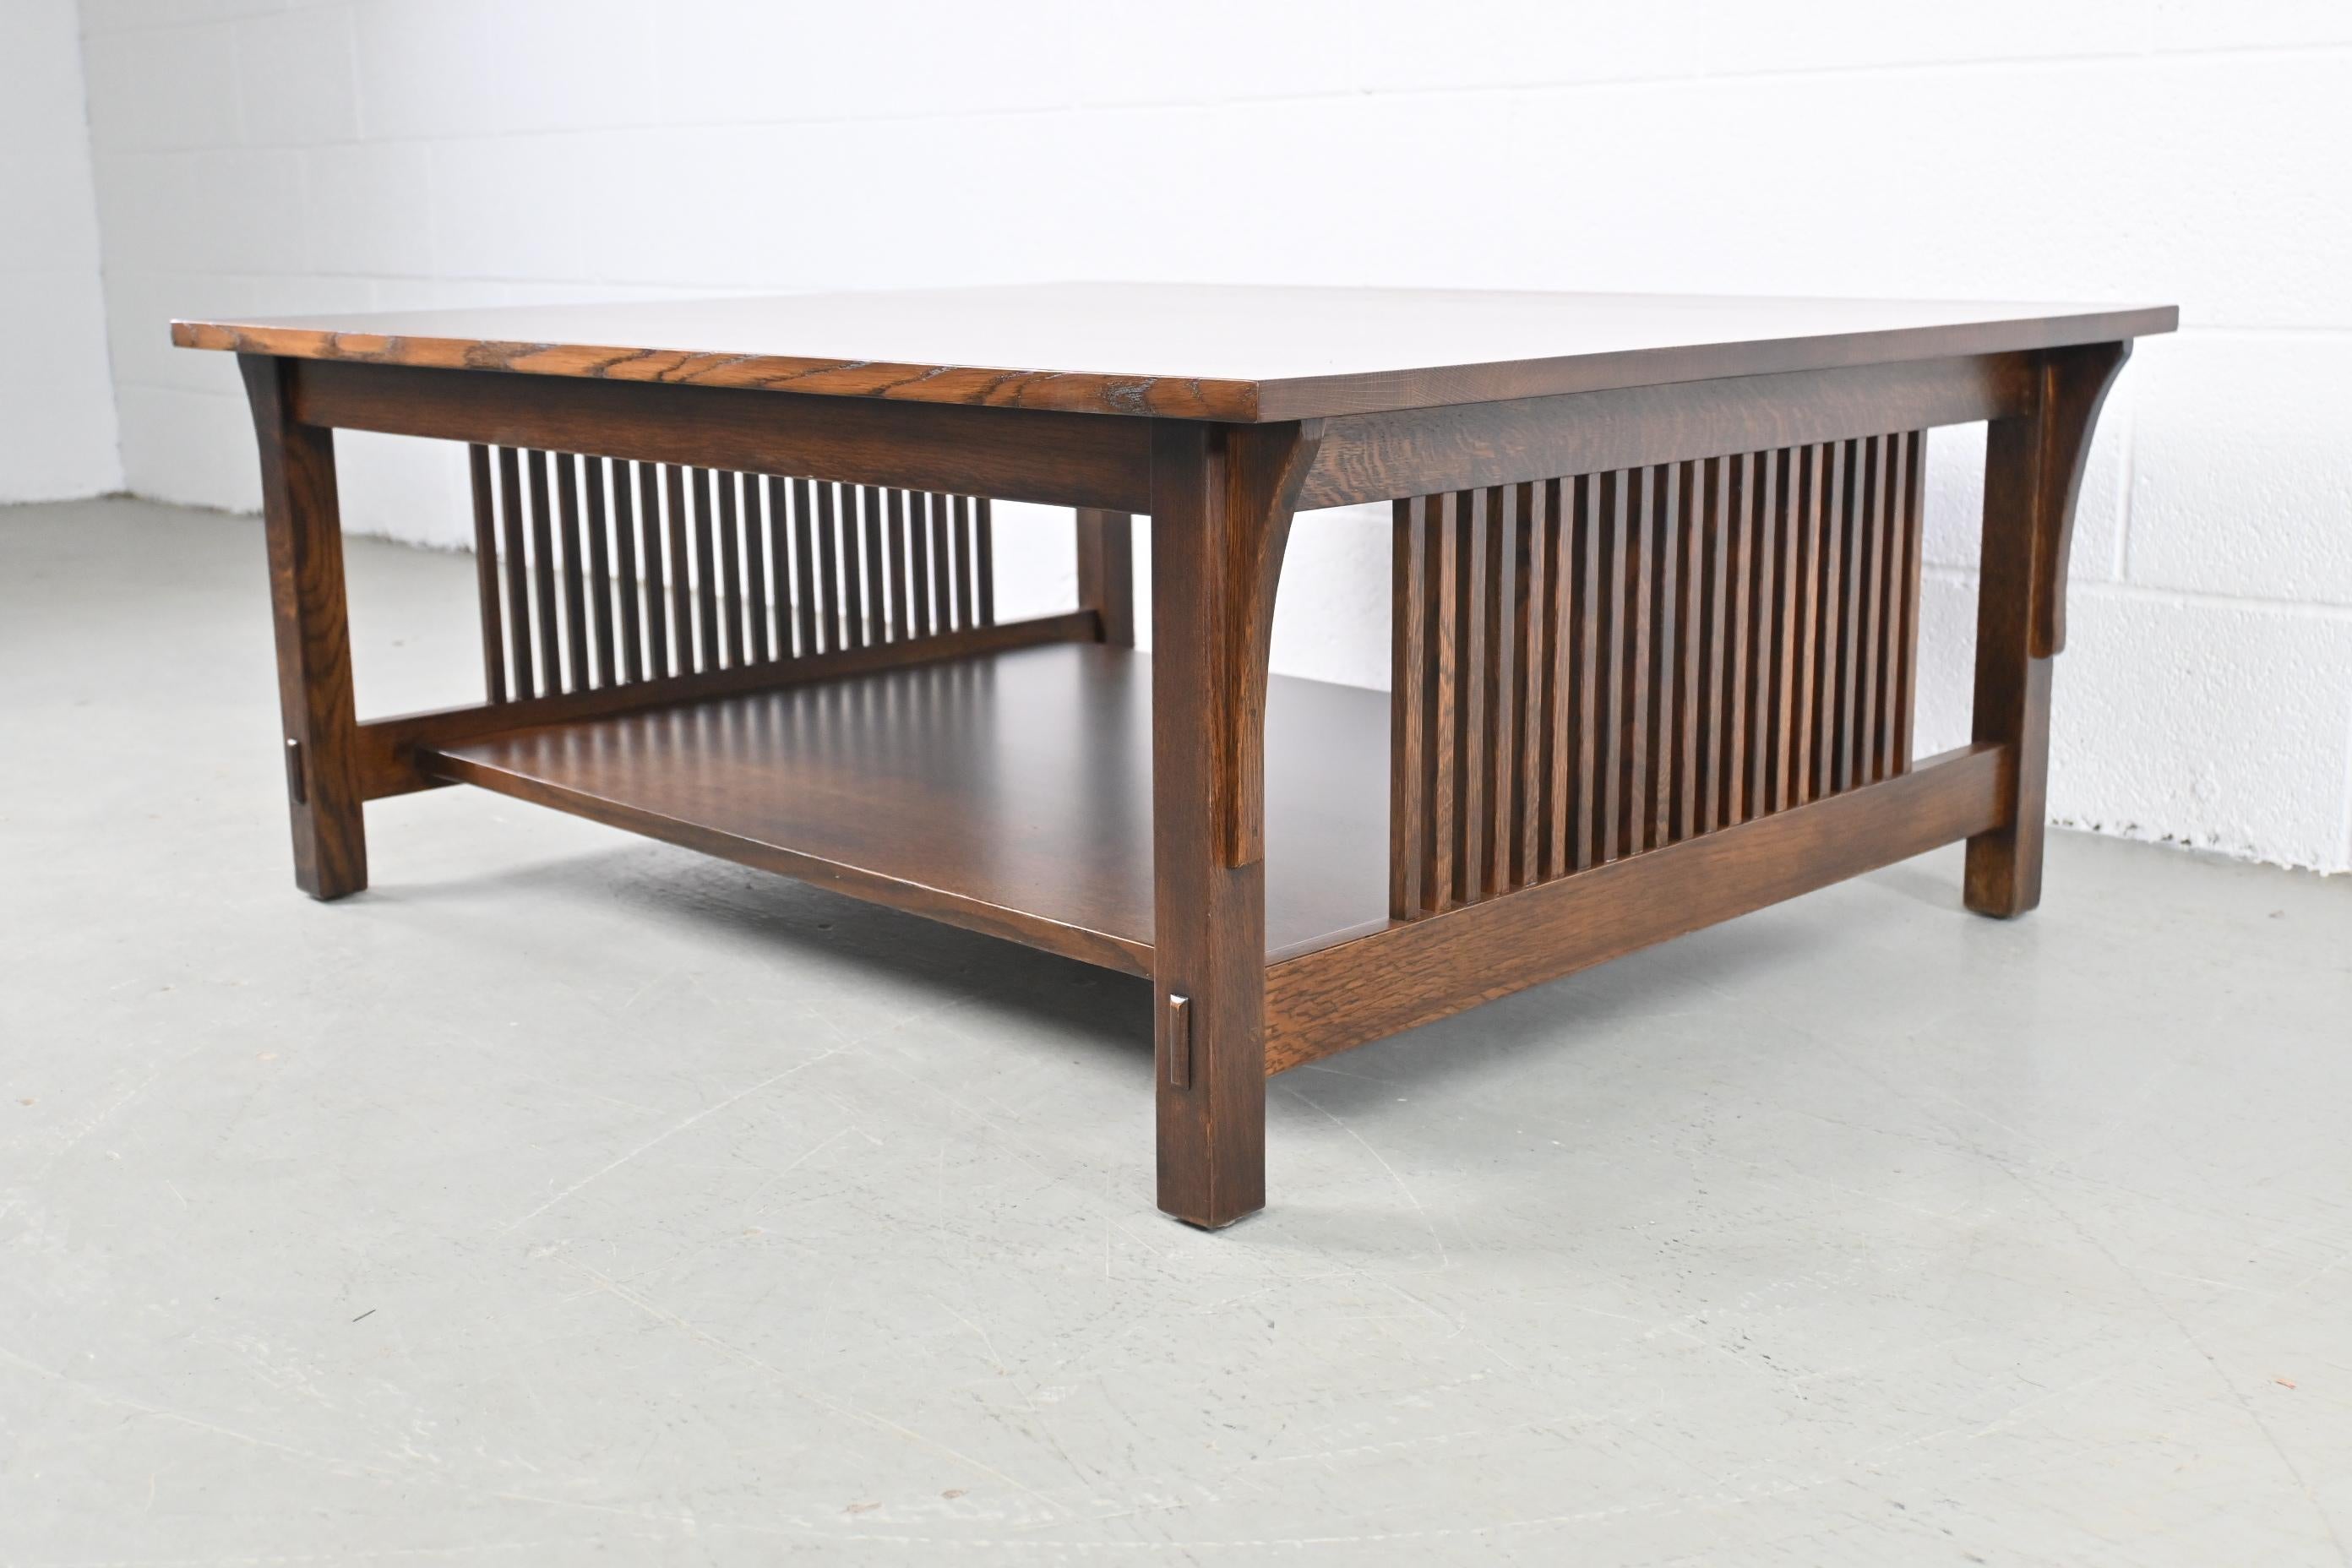 Stickley quarter Sawn oak Mission style coffee table

Stickley Furniture, USA, 1990s

Measures: 44 Wide x 35.63 Deep x 17 High.

Mission style solid quarter sawn oak coffee table.

Professionally Restored. Excellent condition.